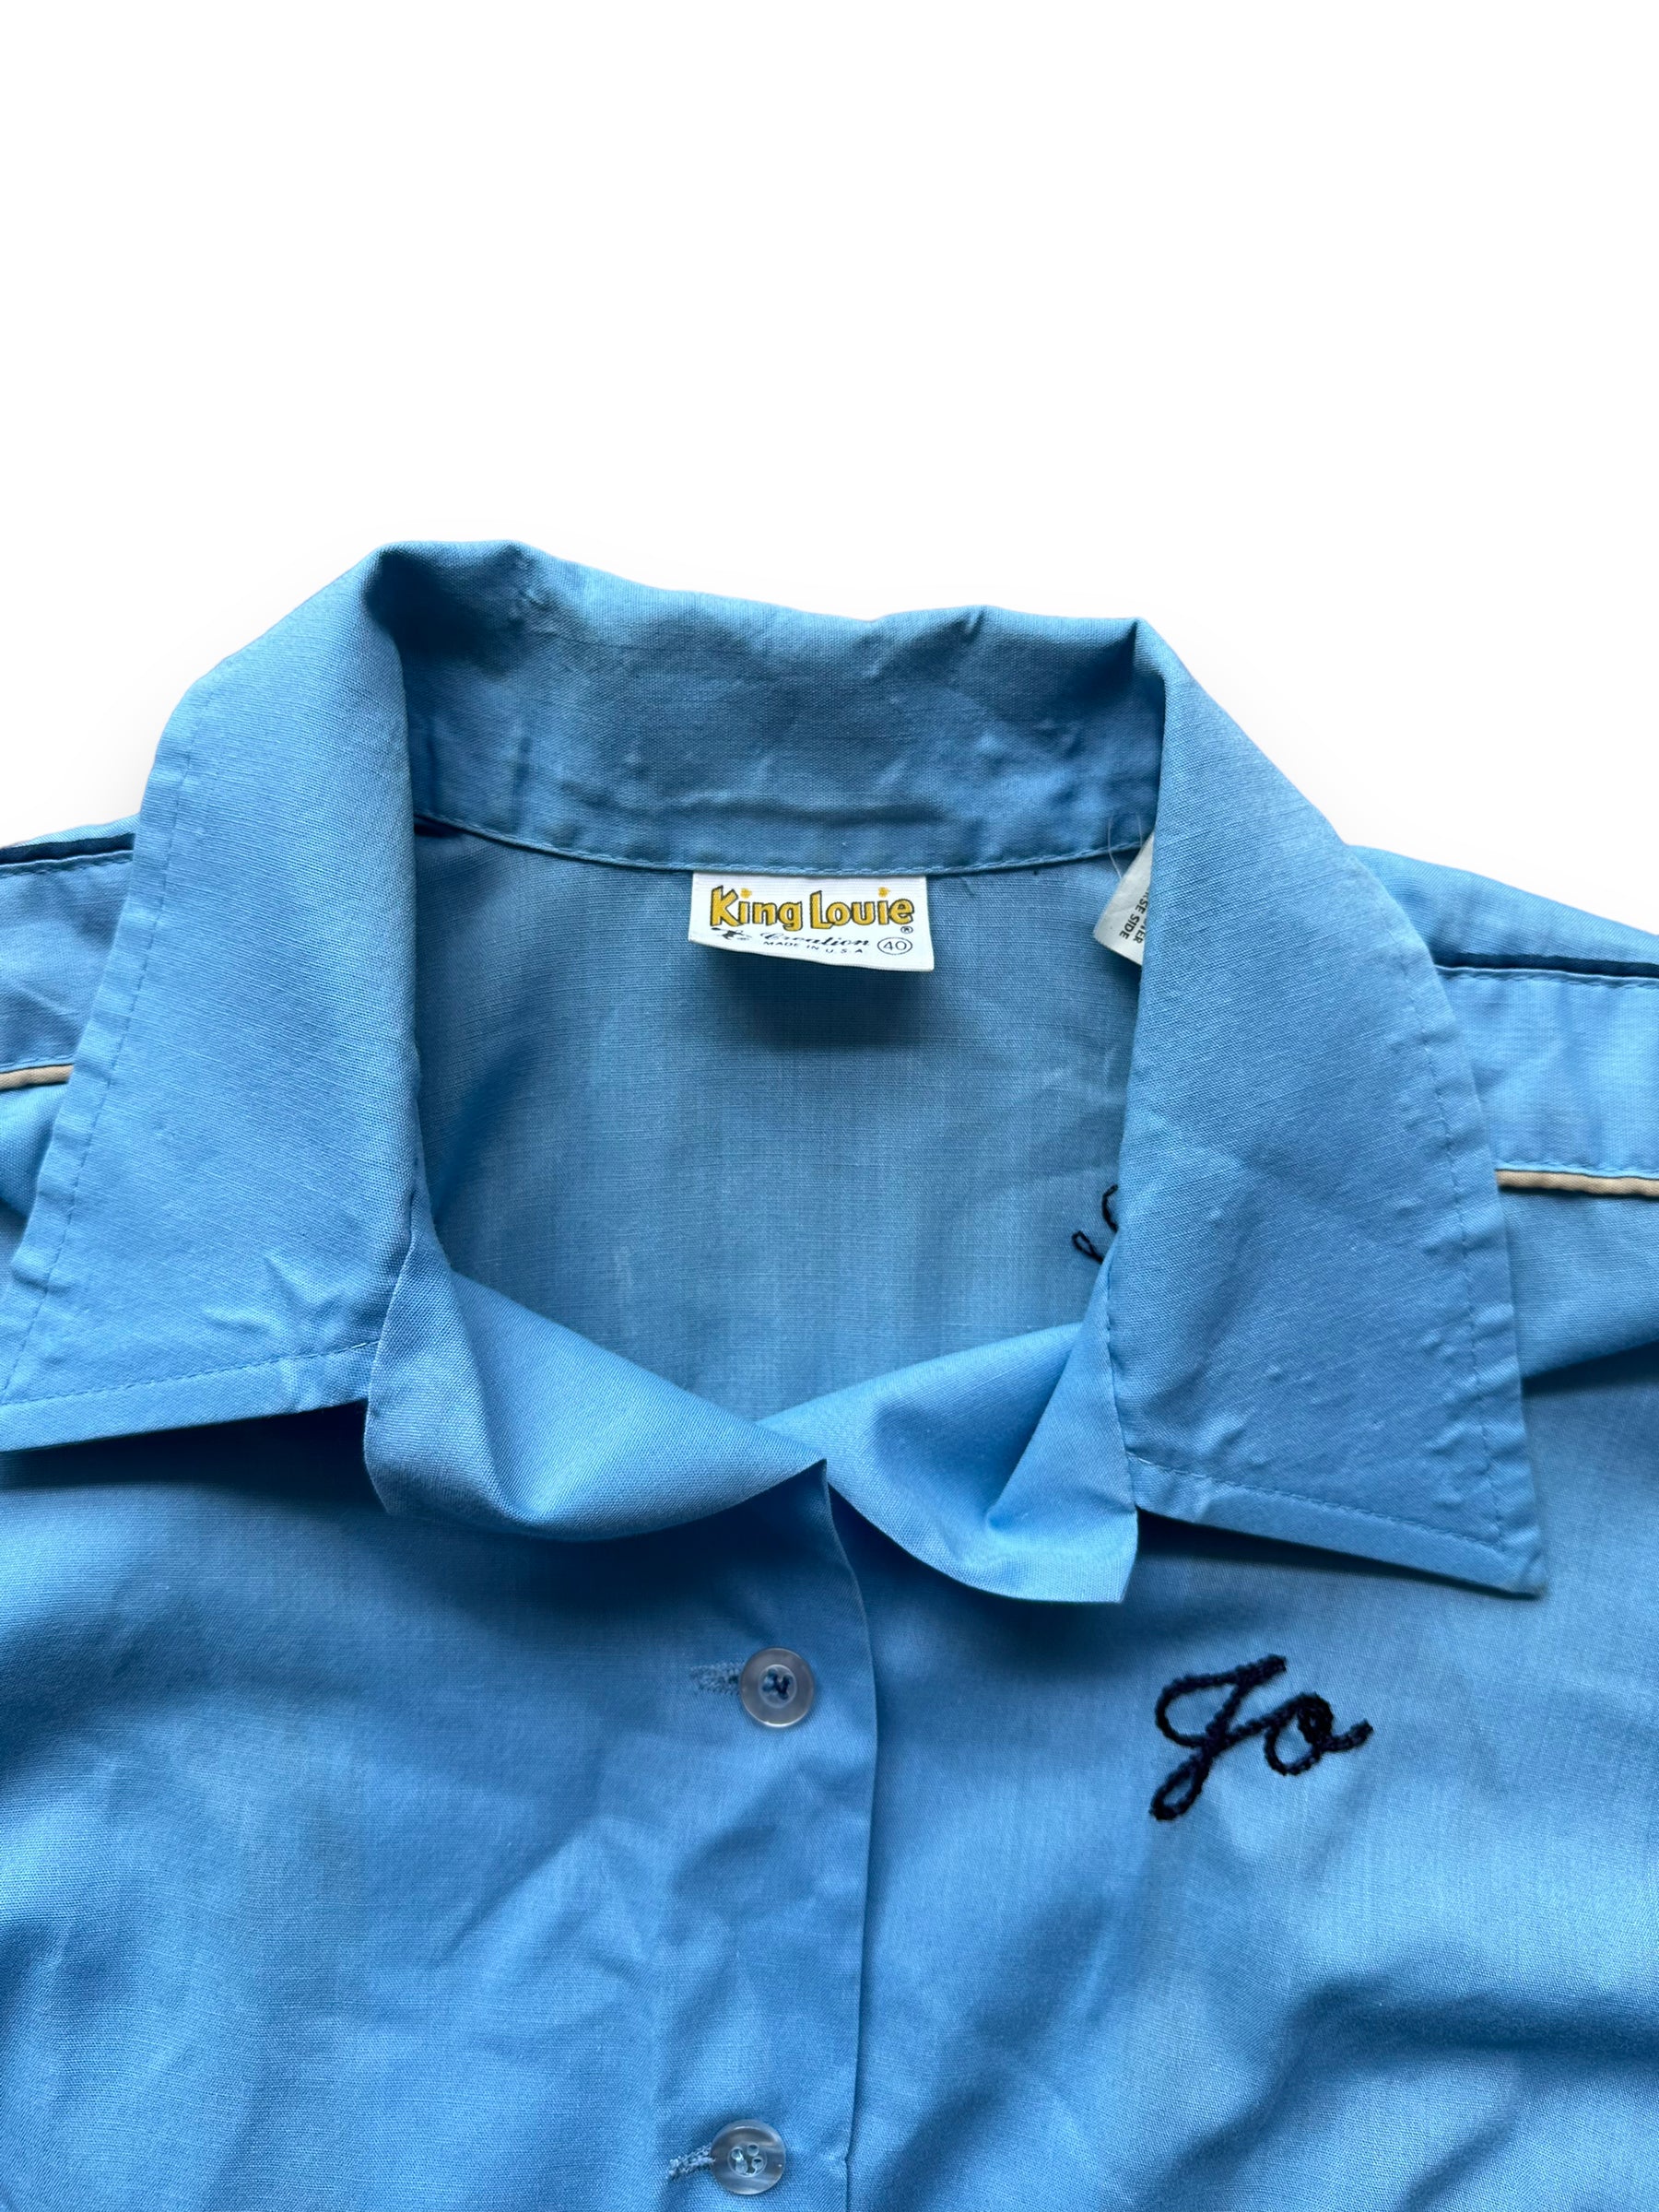 Collar of Vintage "New Frontier Lanes" Chainstitched Bowling Shirt SZ 40 | Vintage Bowling Shirt Seattle | Barn Owl Vintage Seattle